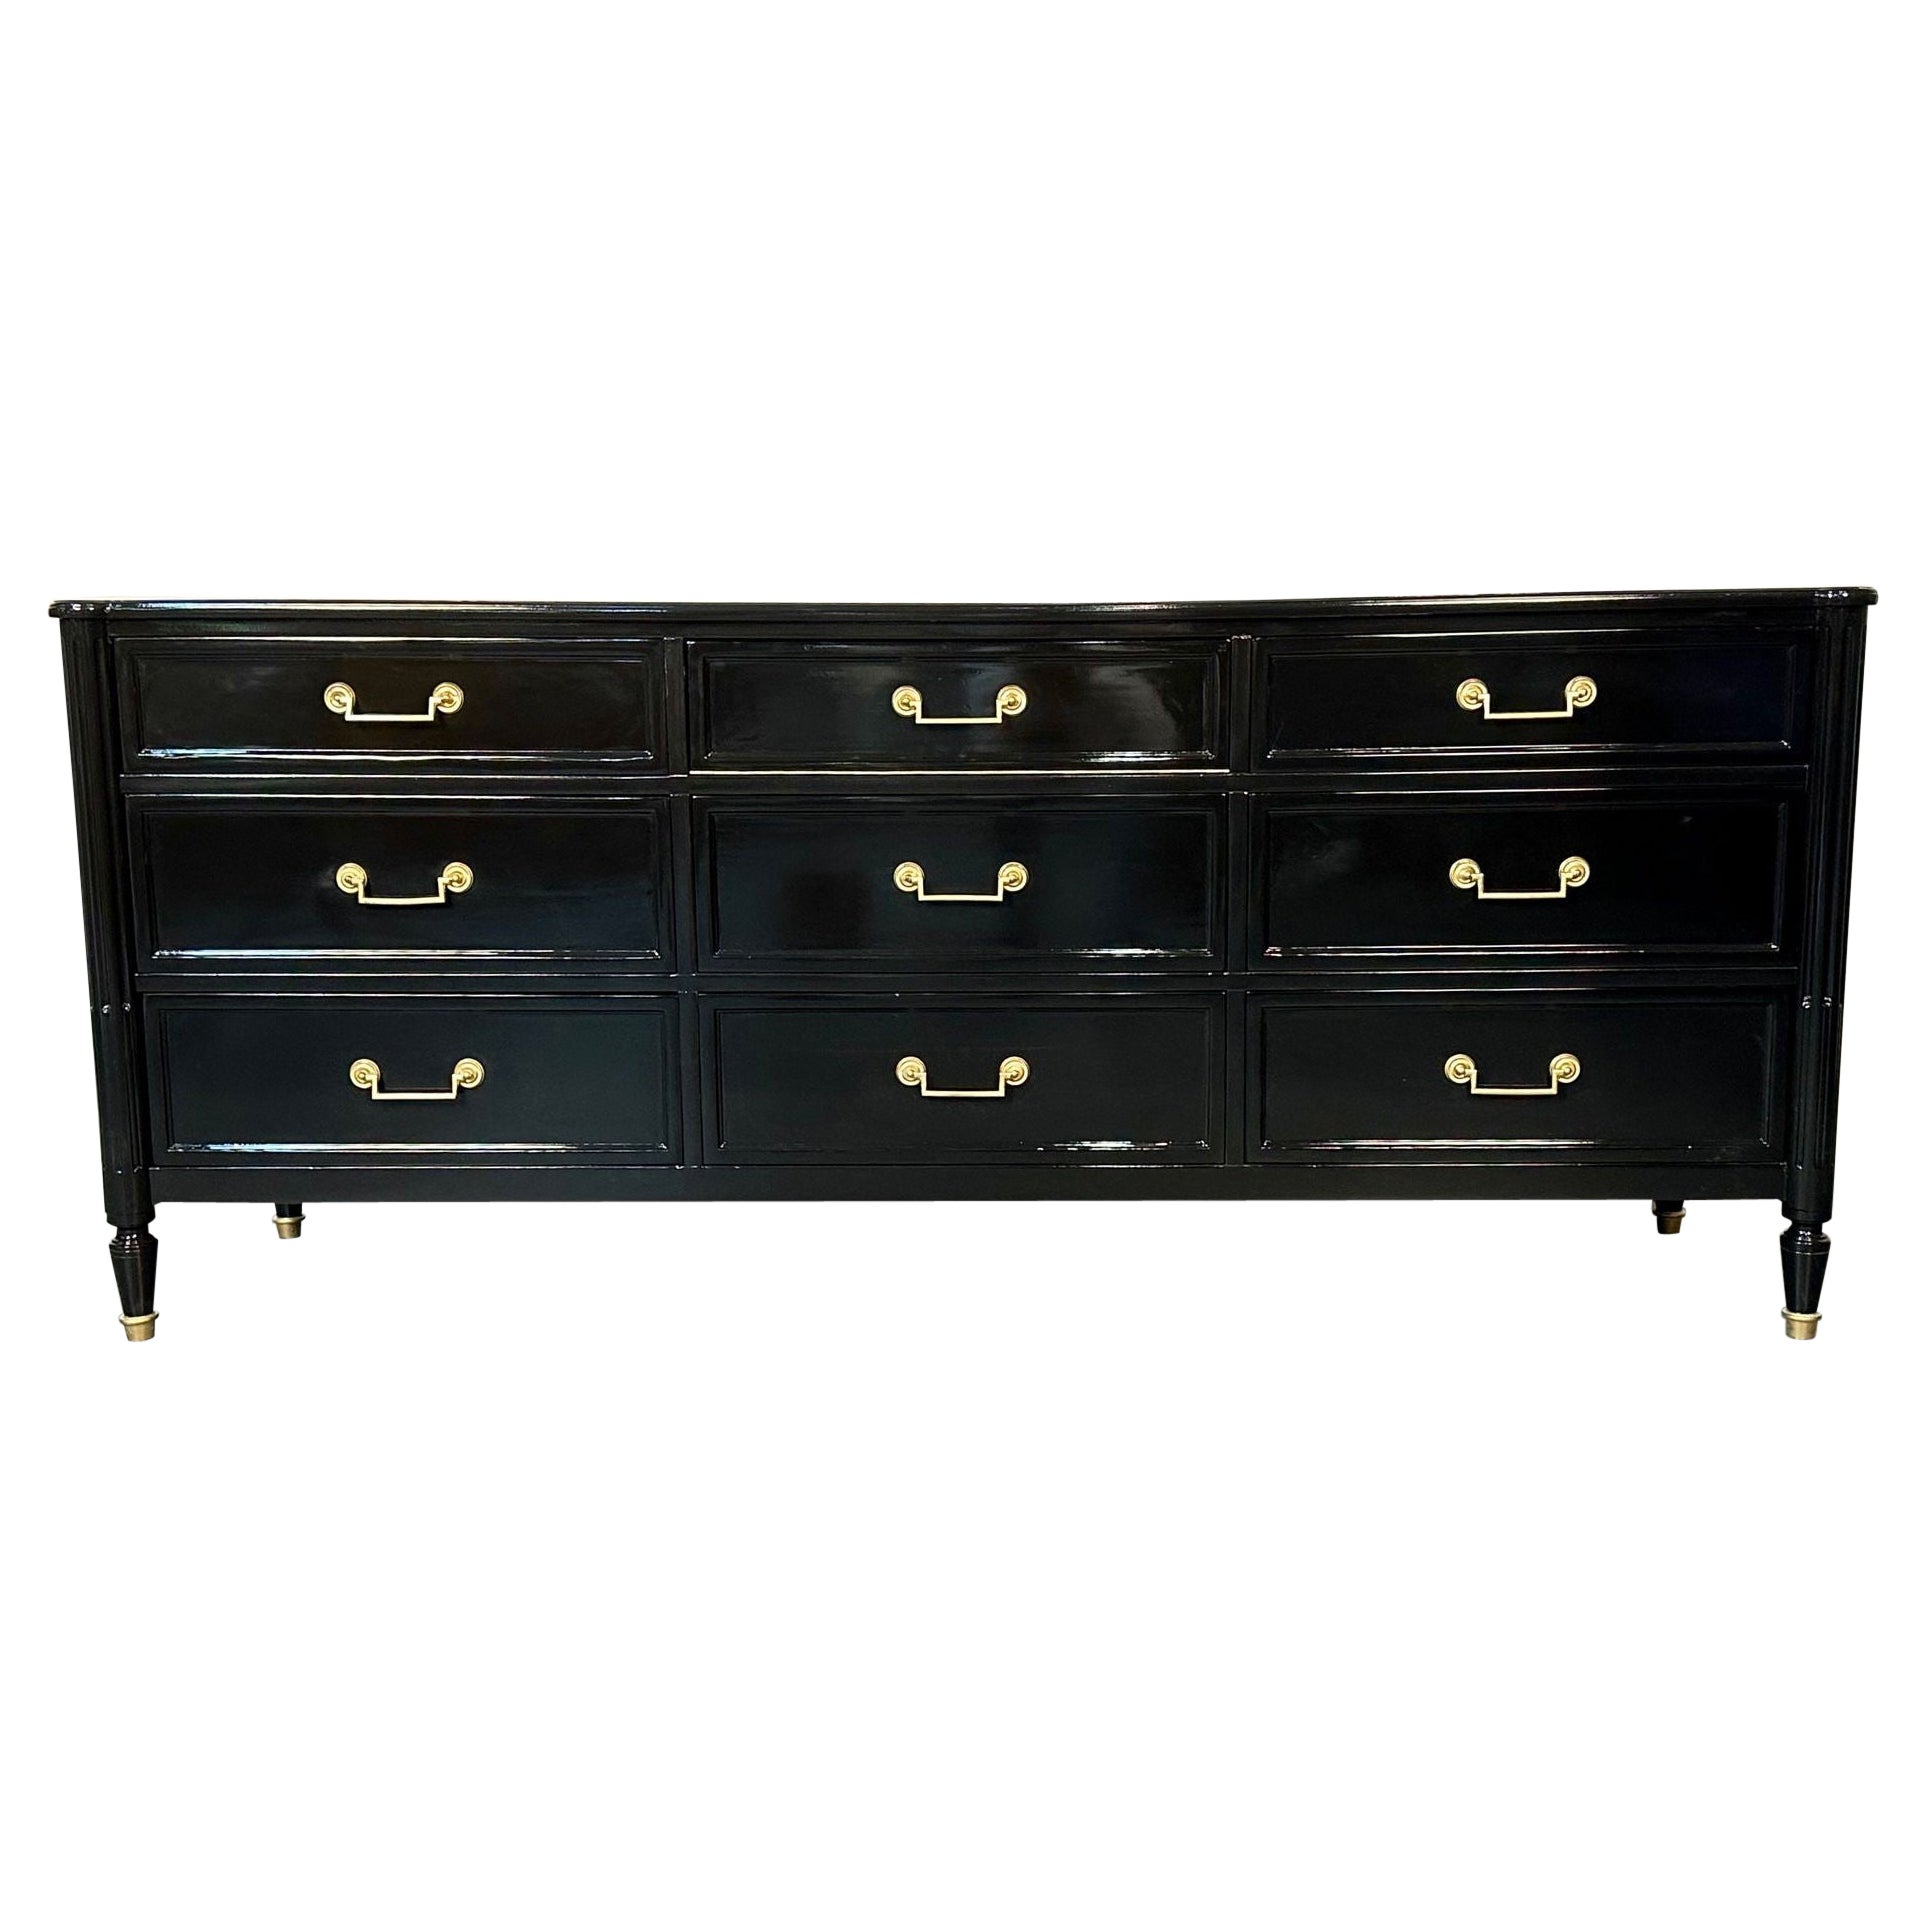 Hollywood Regency Ebony Lacquered Dresser, Chest of Drawers, Jansen Style Bronze